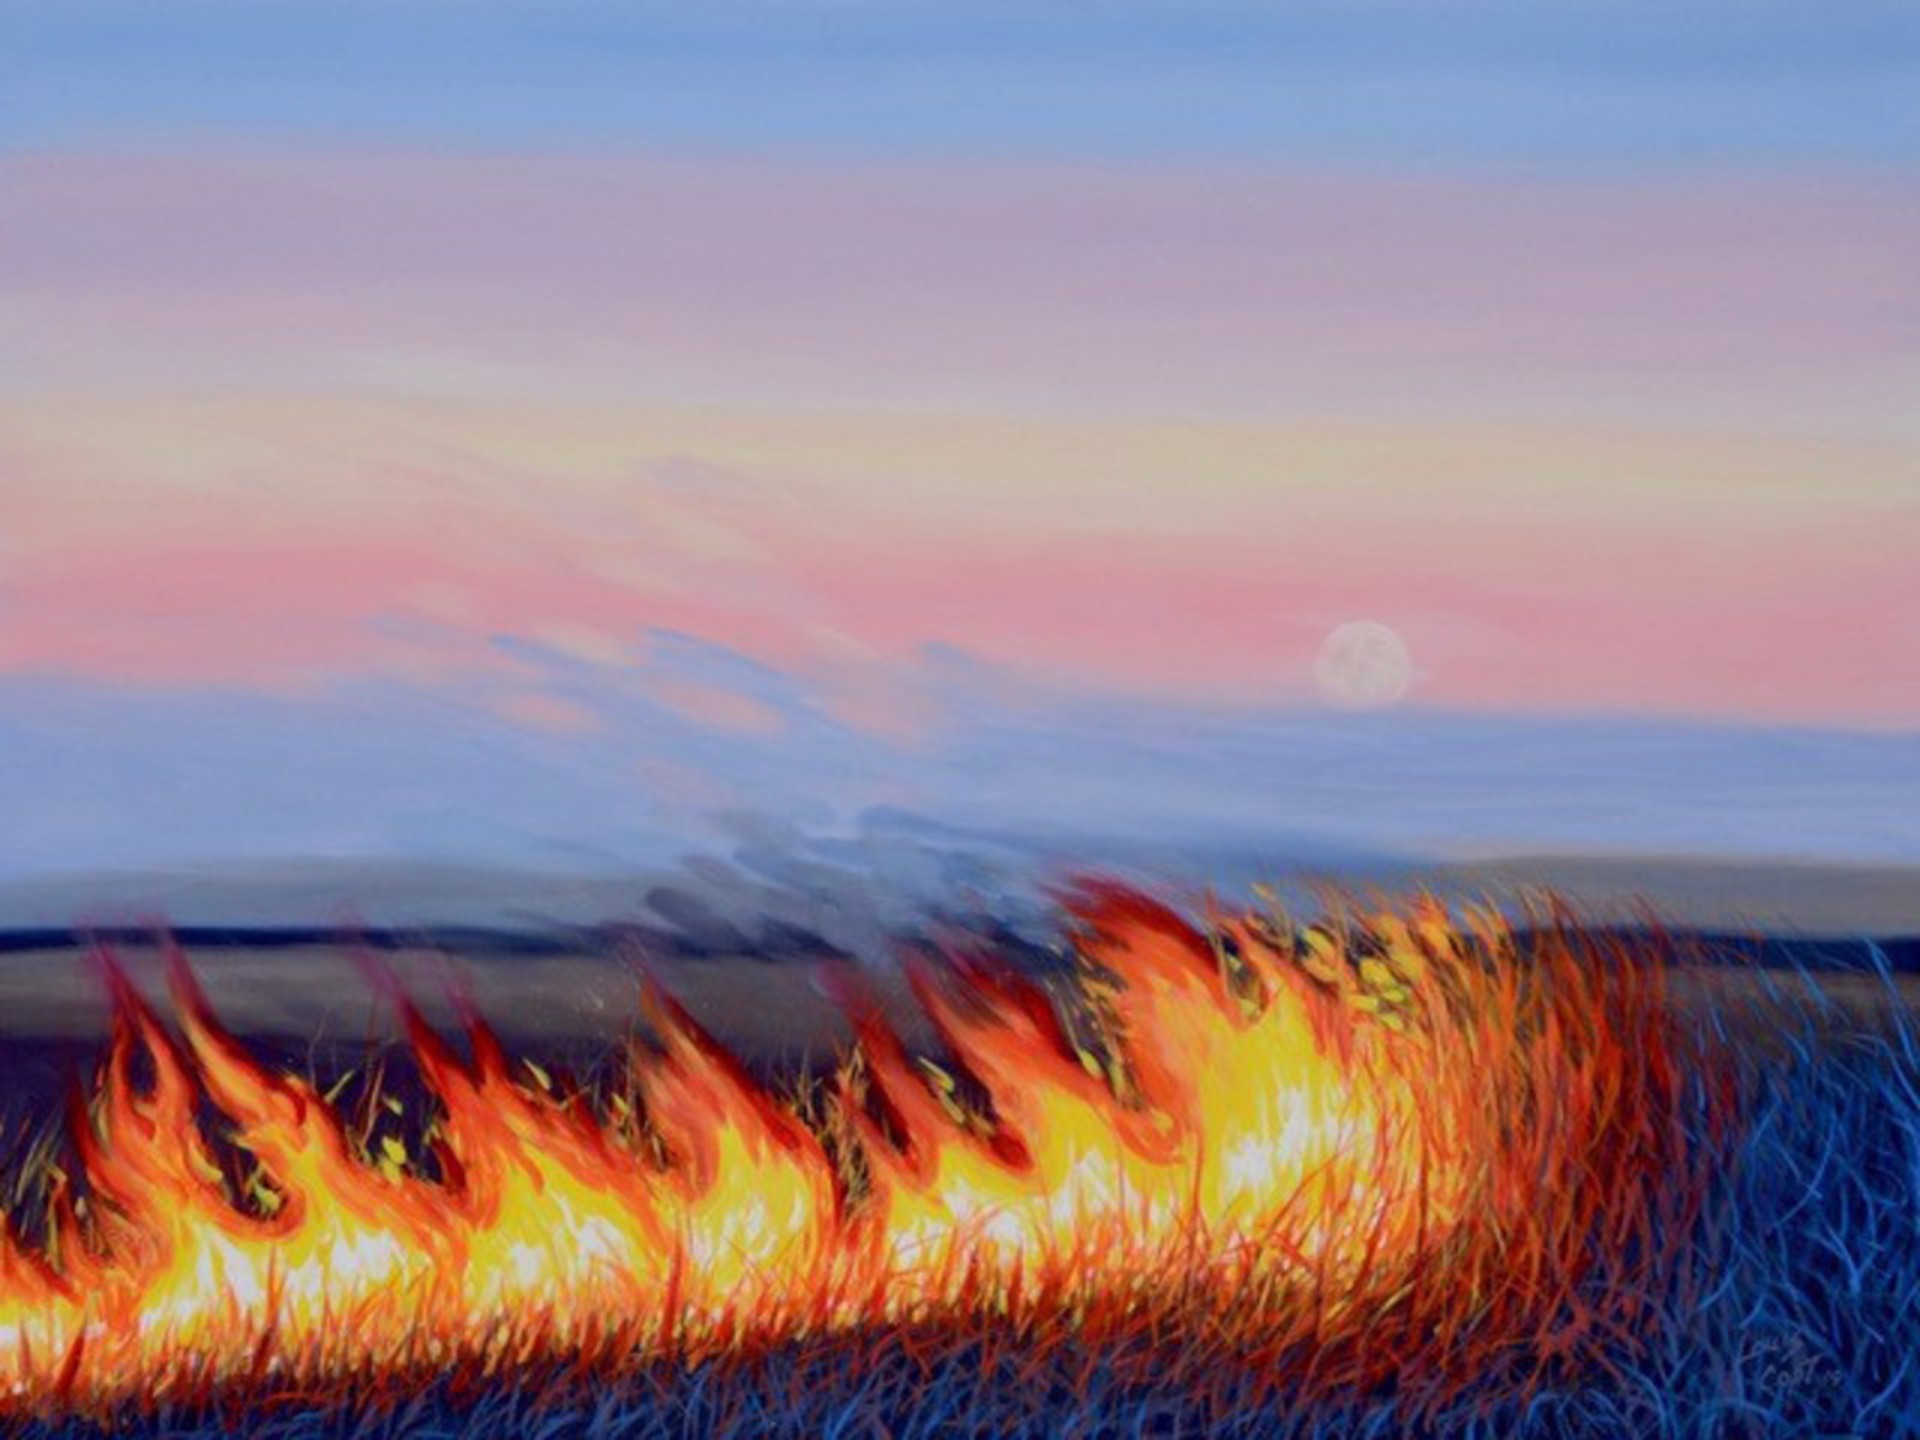 Moonrise and Fire by Louis Copt